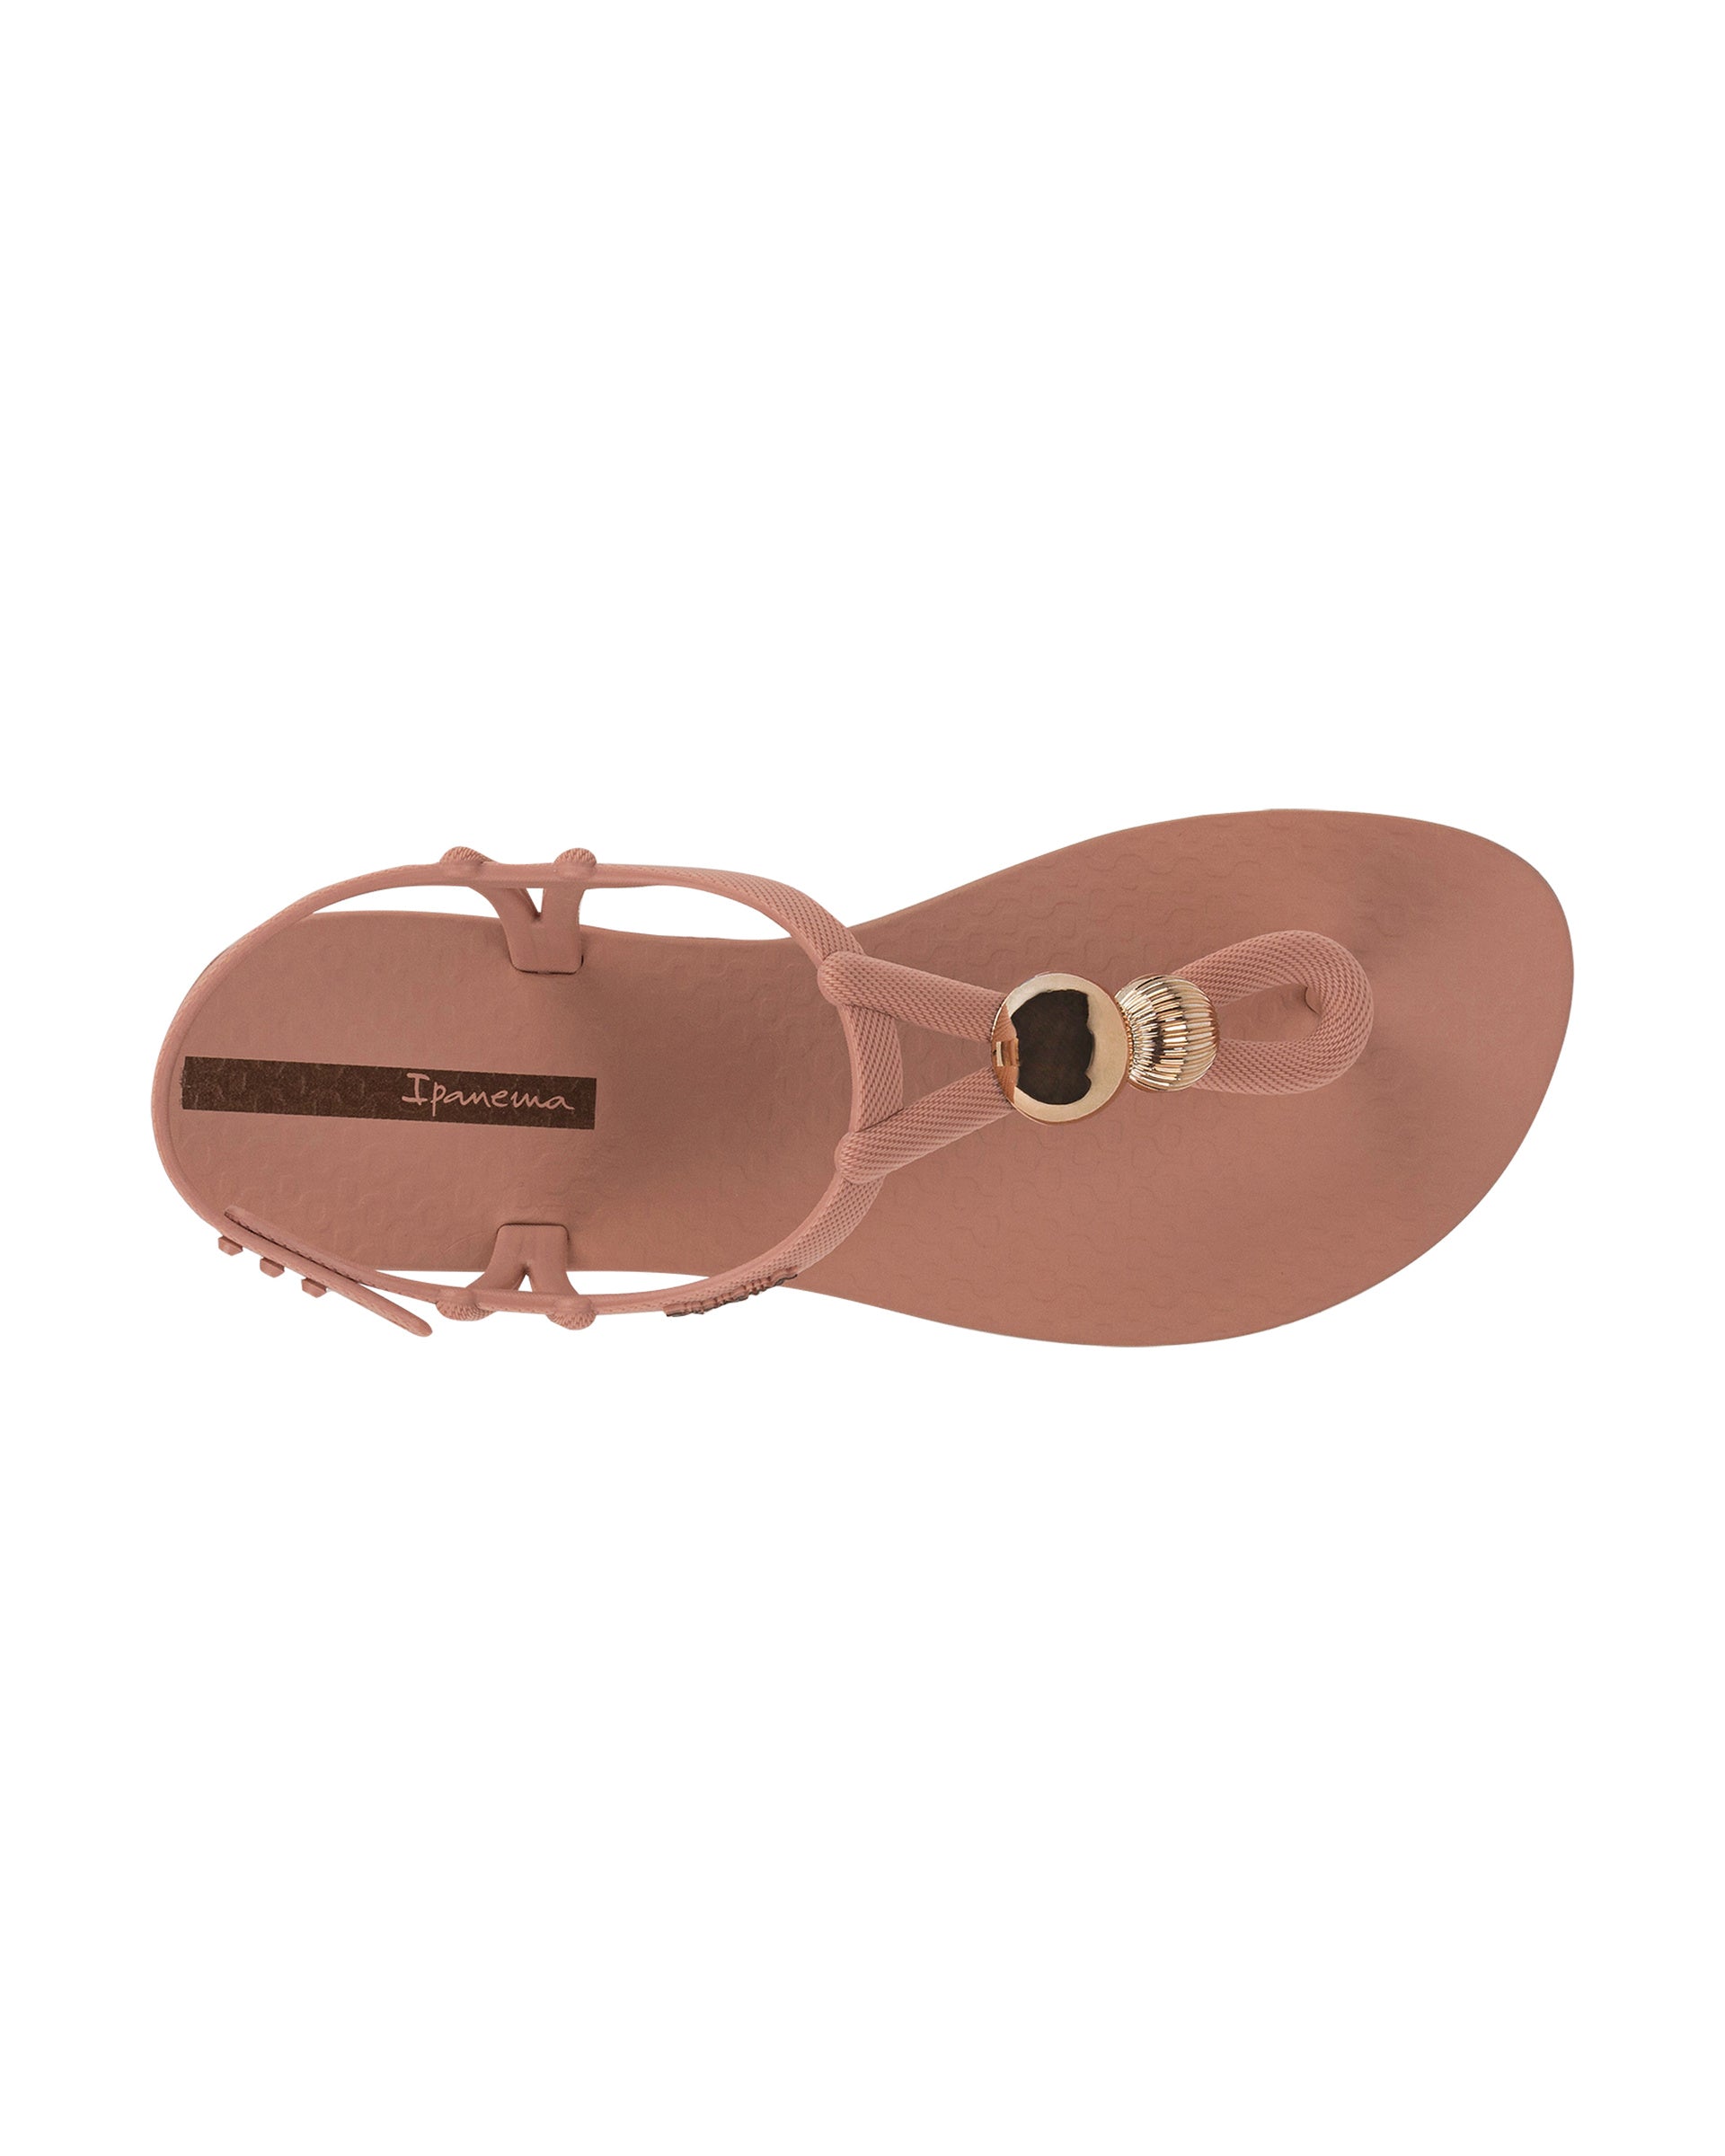 Top view of a light pink Ipanema Class Spheres women's t-strap sandal with metallic bauble.